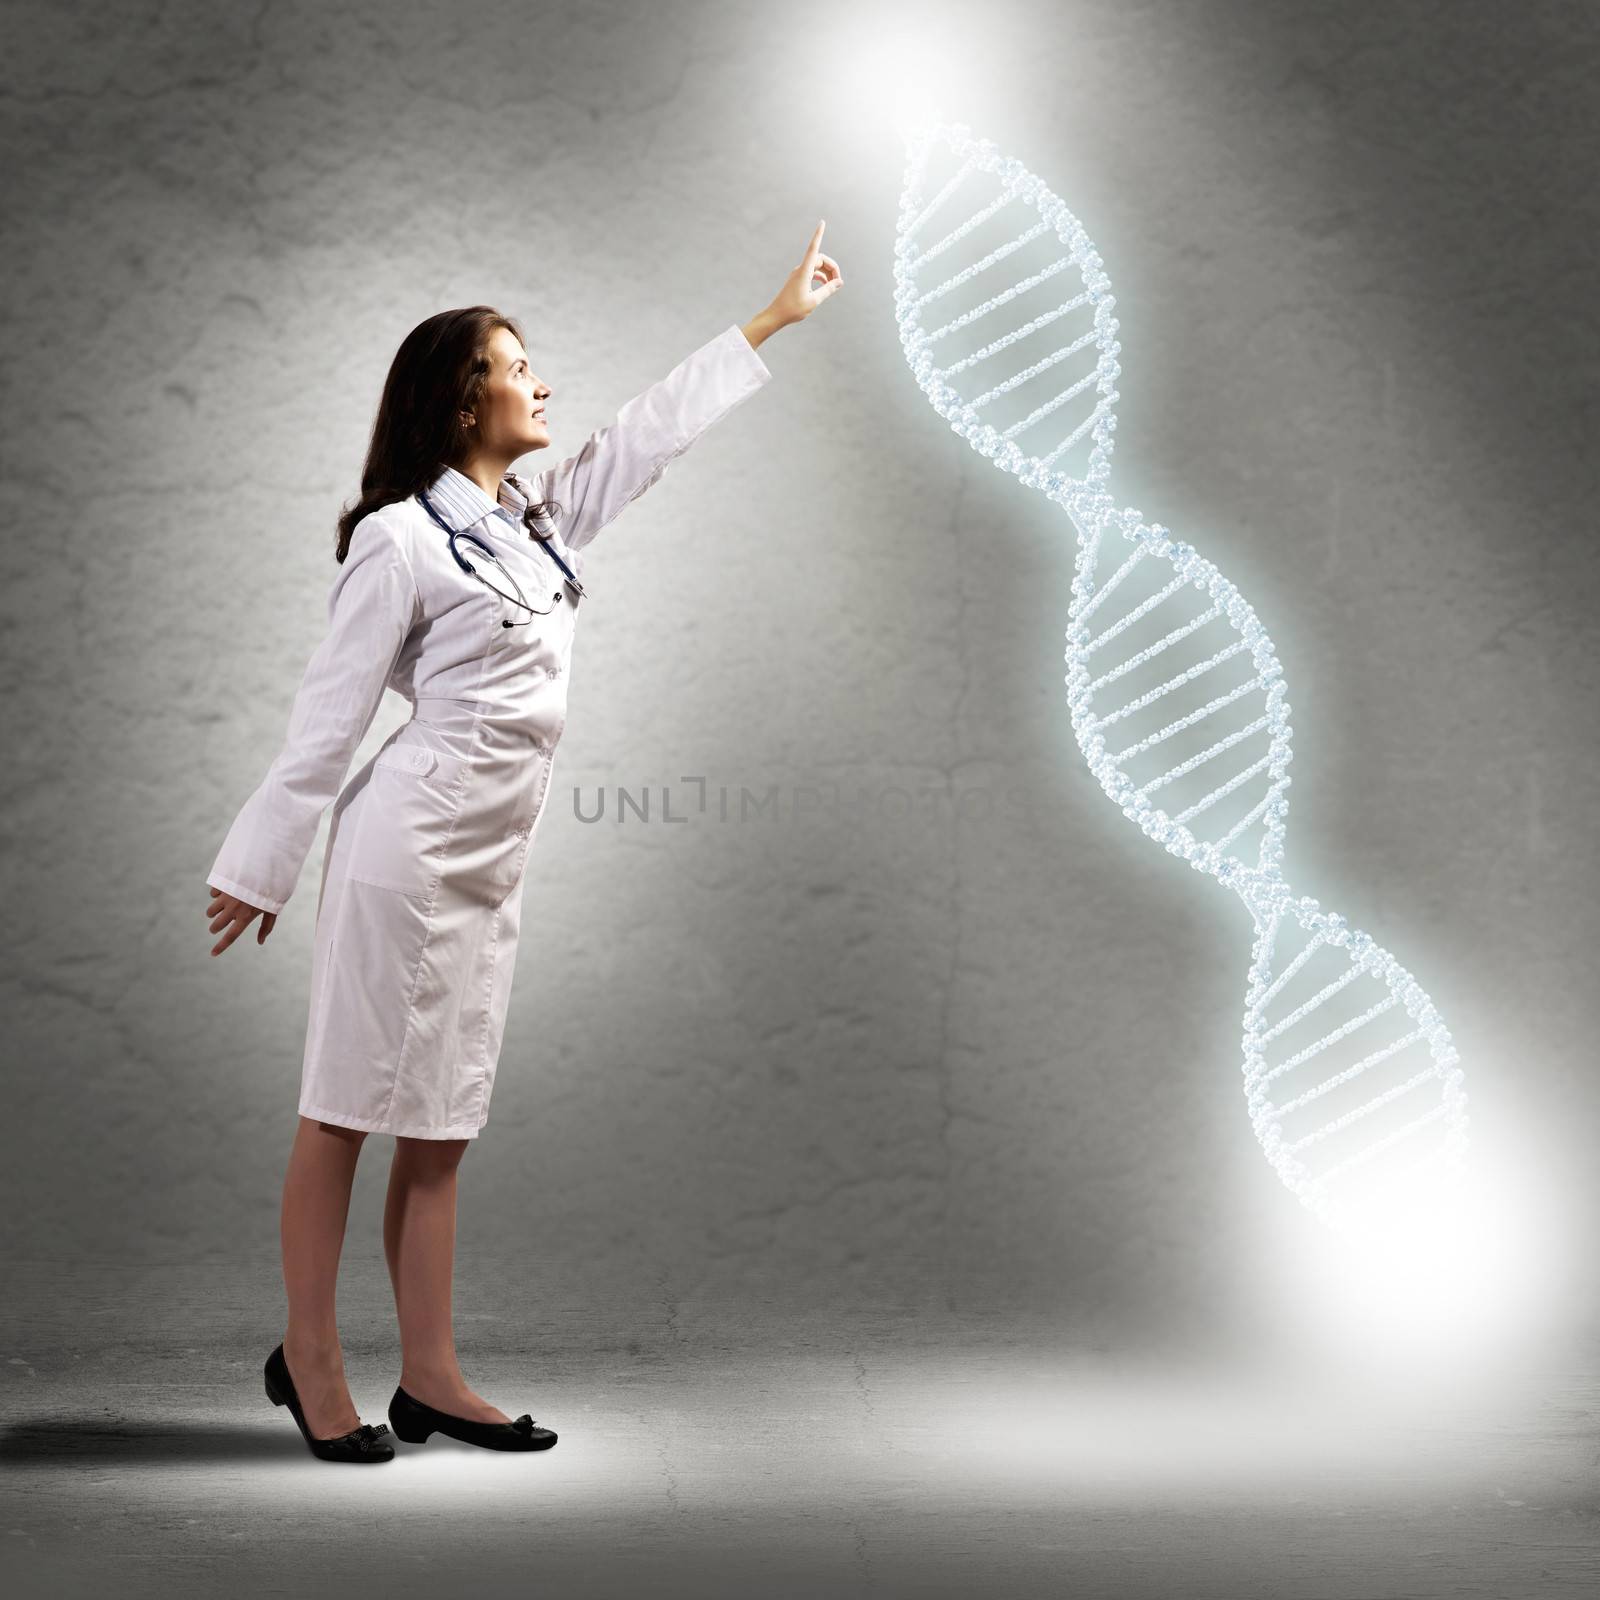 young woman doctor finger glowing DNA symbol, smiling and looking ahead